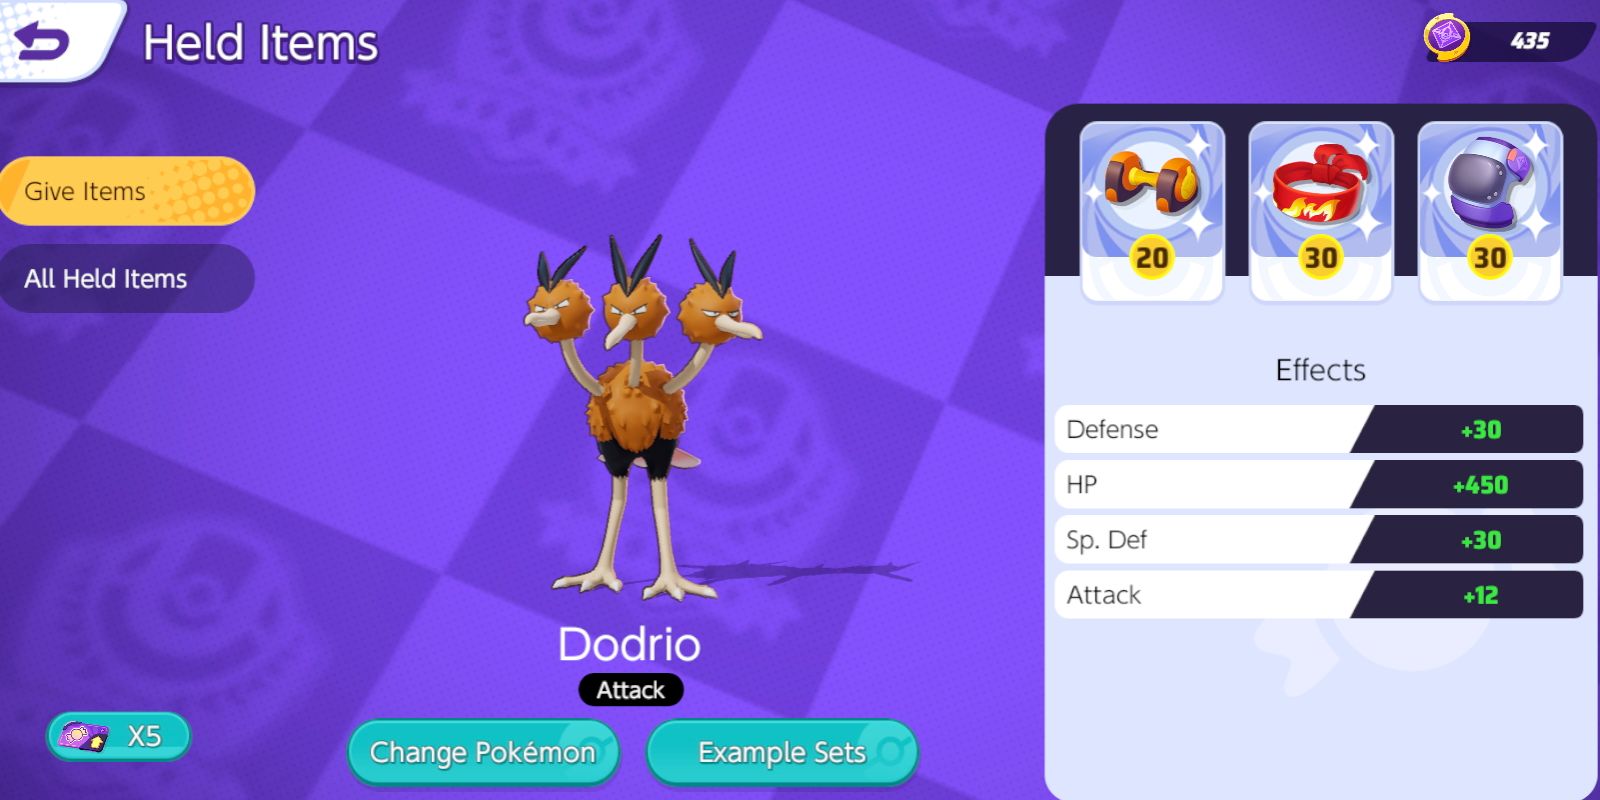 Dodrio's Held Item selection screen with Attack Weight, Focus Band, and Score Shield selected